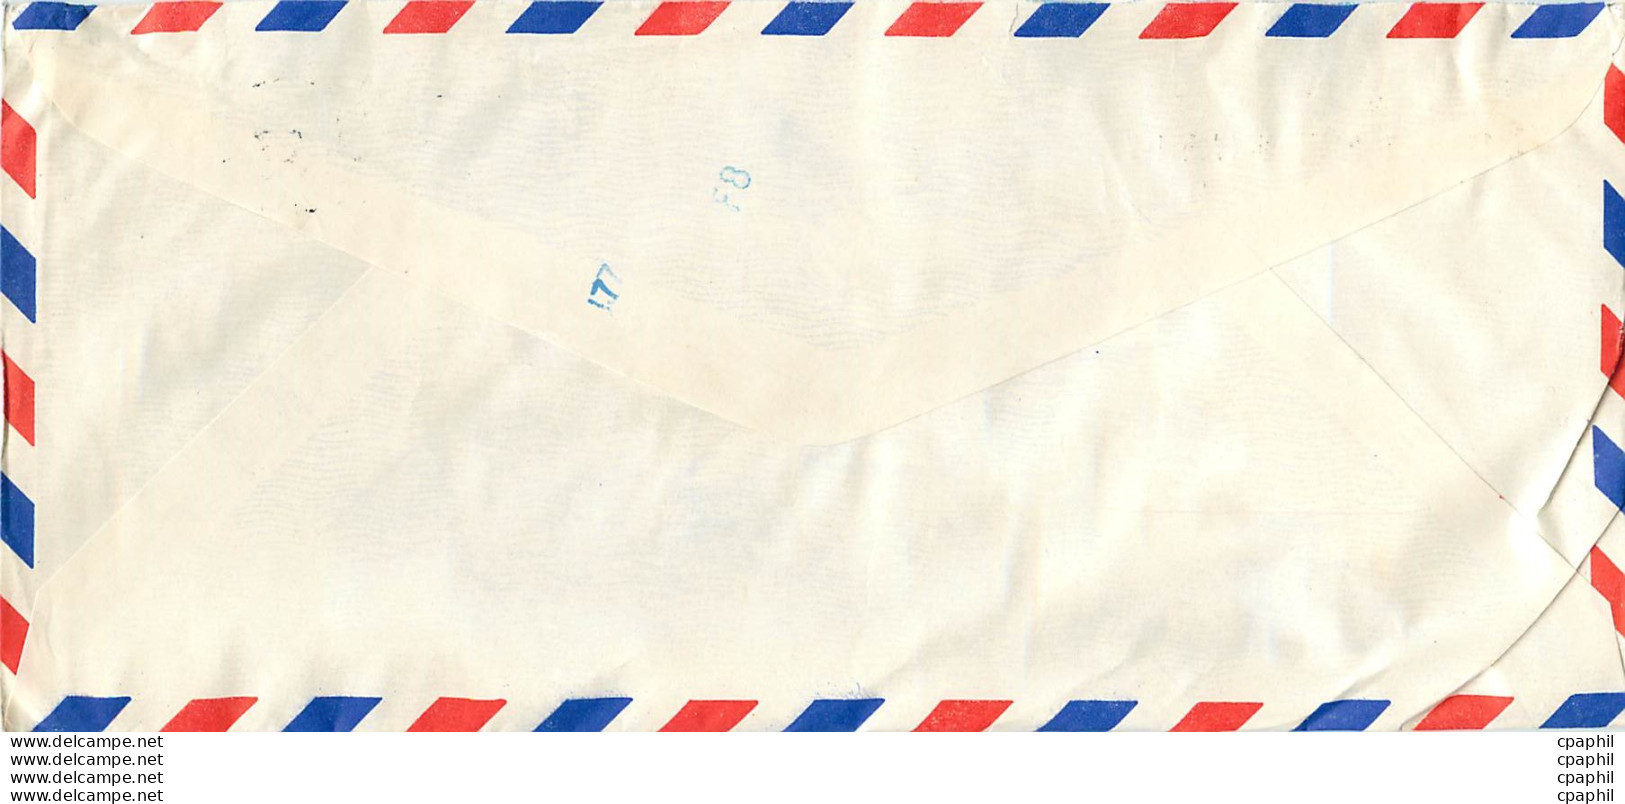 Lettre Cover Chine China University Iowa Taipei - Covers & Documents